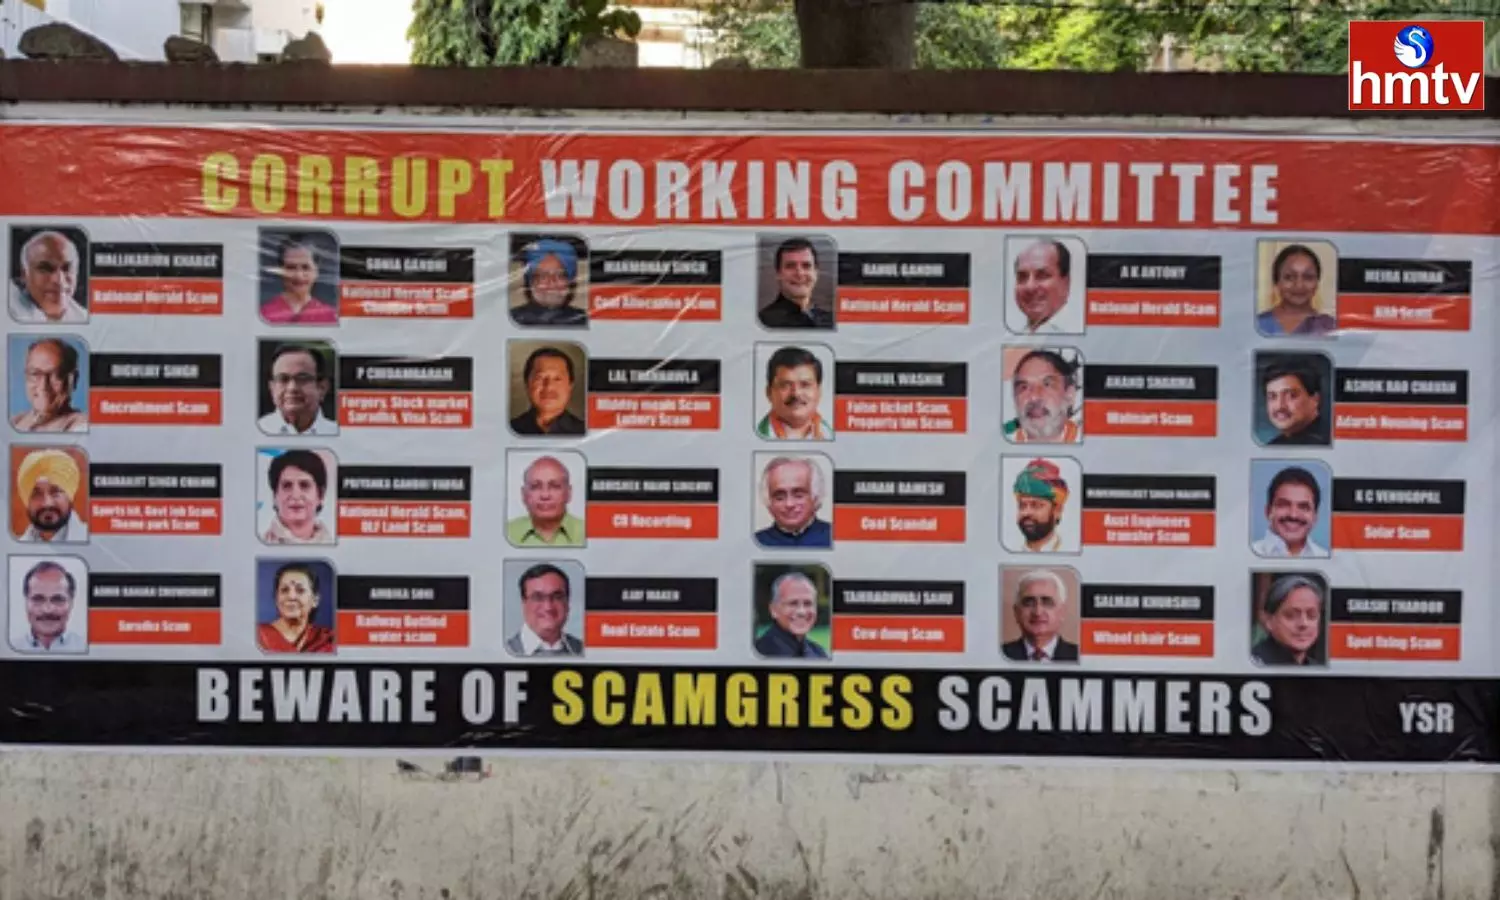 Posters With Pictures Of CWC Members In Hyderabad